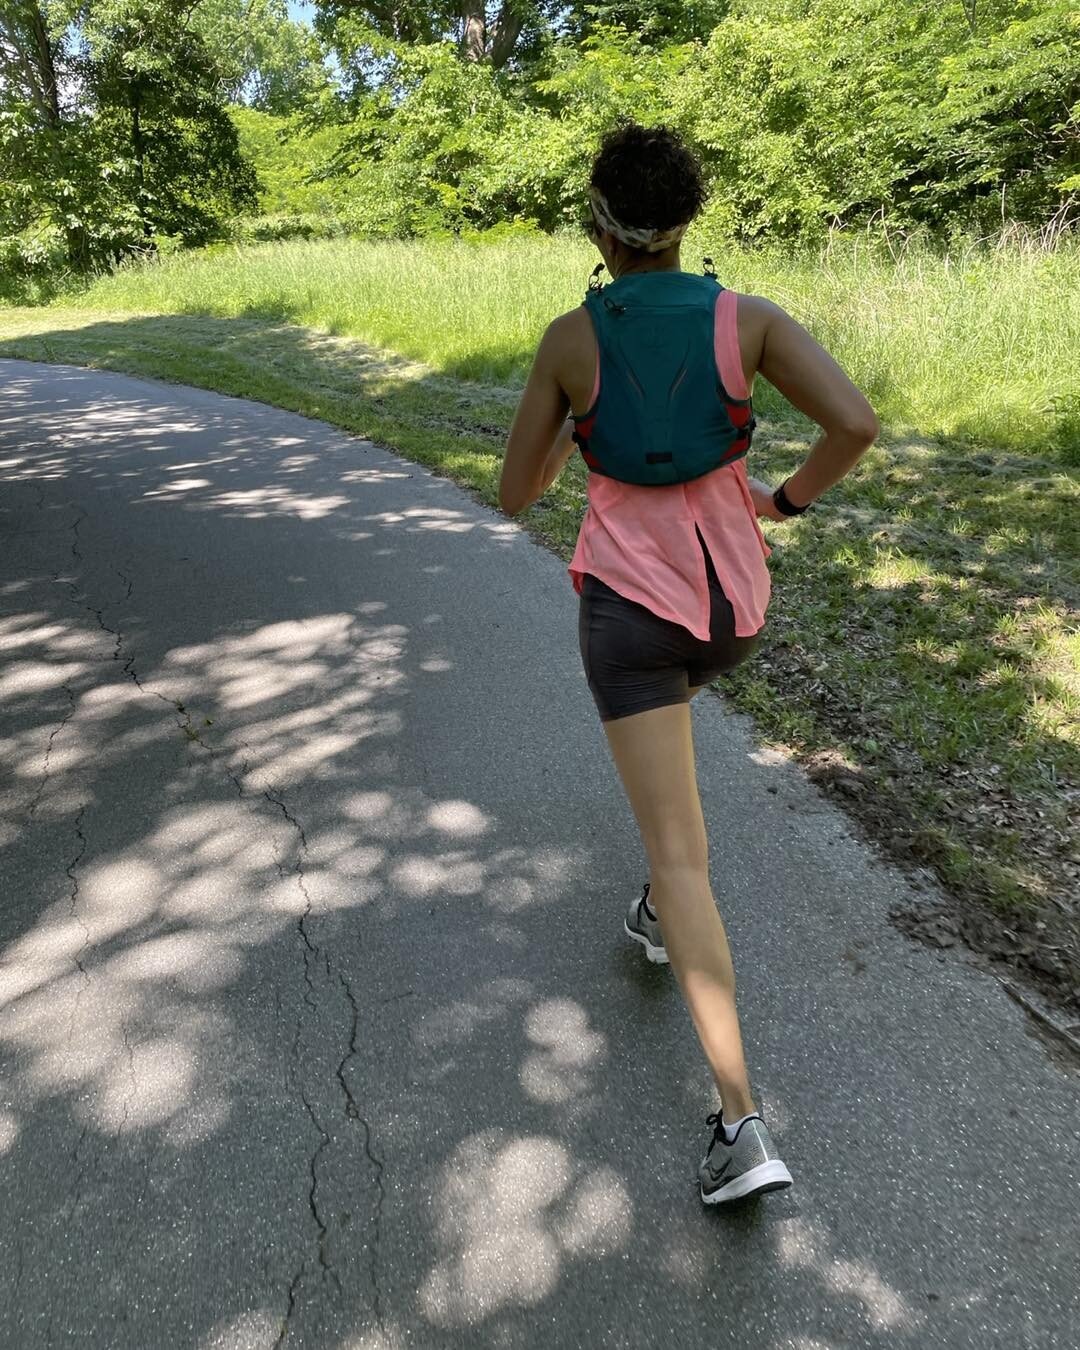 &ldquo;With the training I have been doing it&rsquo;s allowed me to take a little more time to reflect on things. It takes a team of people to keep me going. I&rsquo;ve been doing a lot of swimming, biking, and running lately. Sometimes multiple thin